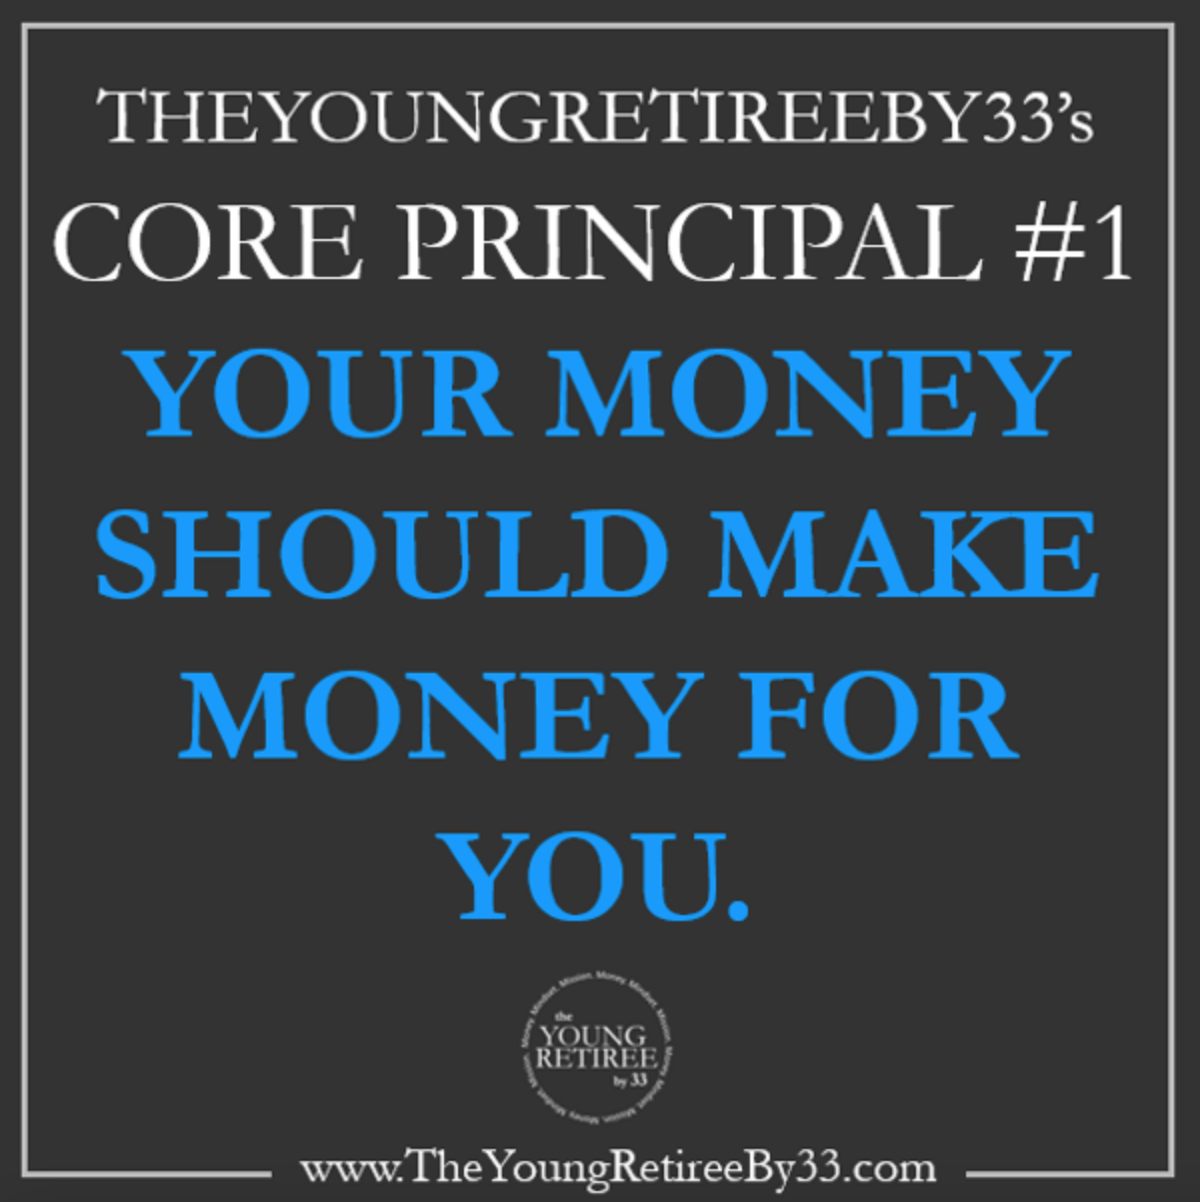 Your Money should make money for you